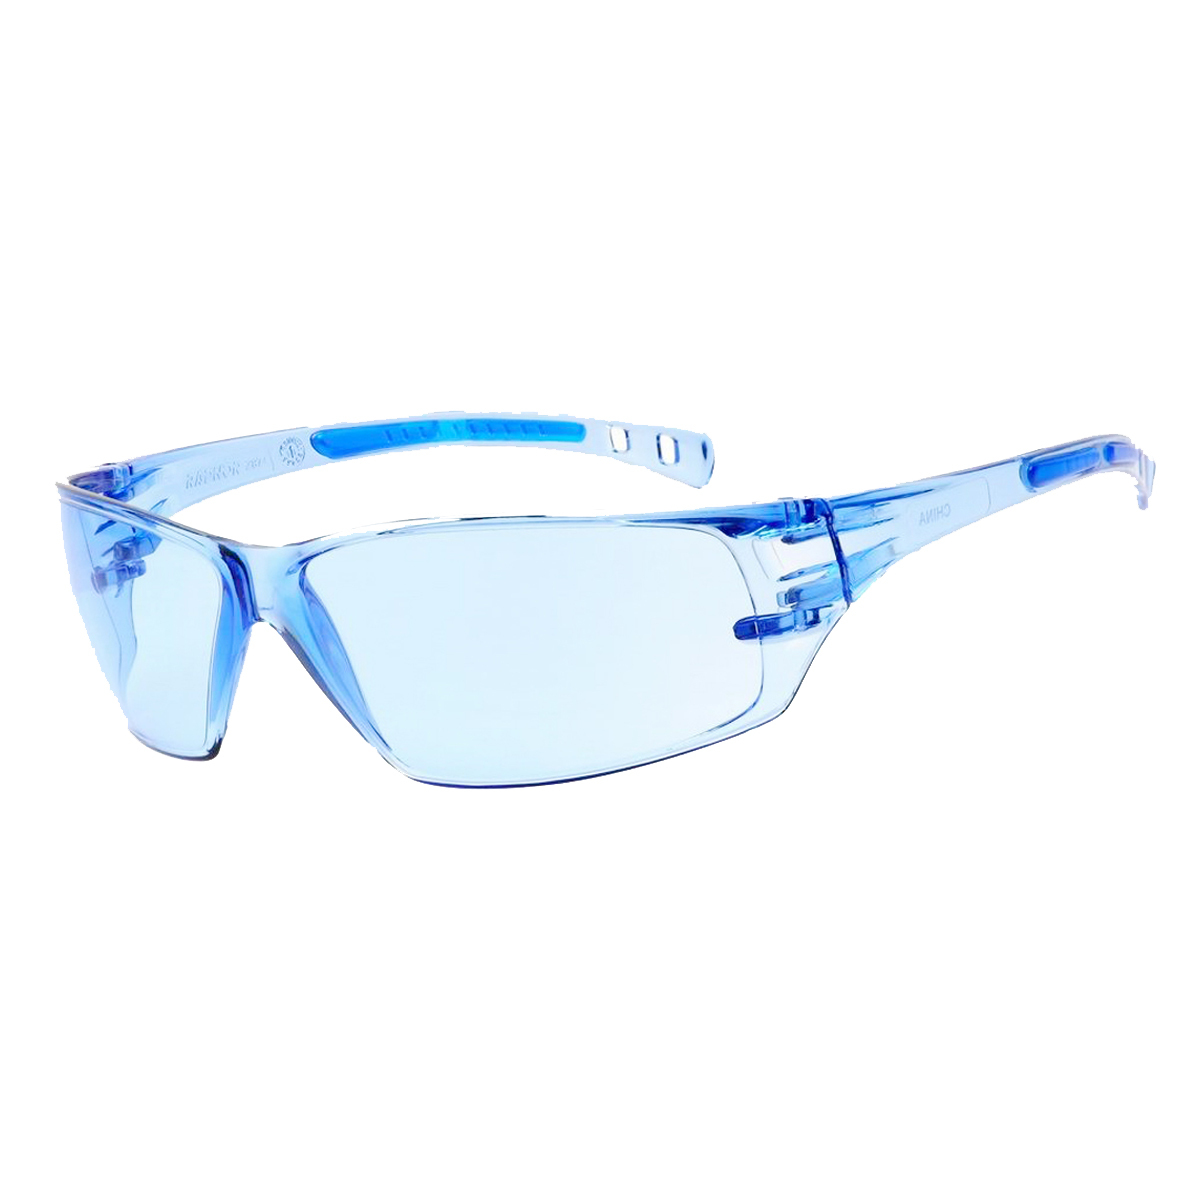 RADNOR® Cobalt Classic Blue Frameless Safety Glasses With Blue Polycarbonate Anti-Scratch Lens And Flexible Cushioned Temples (A